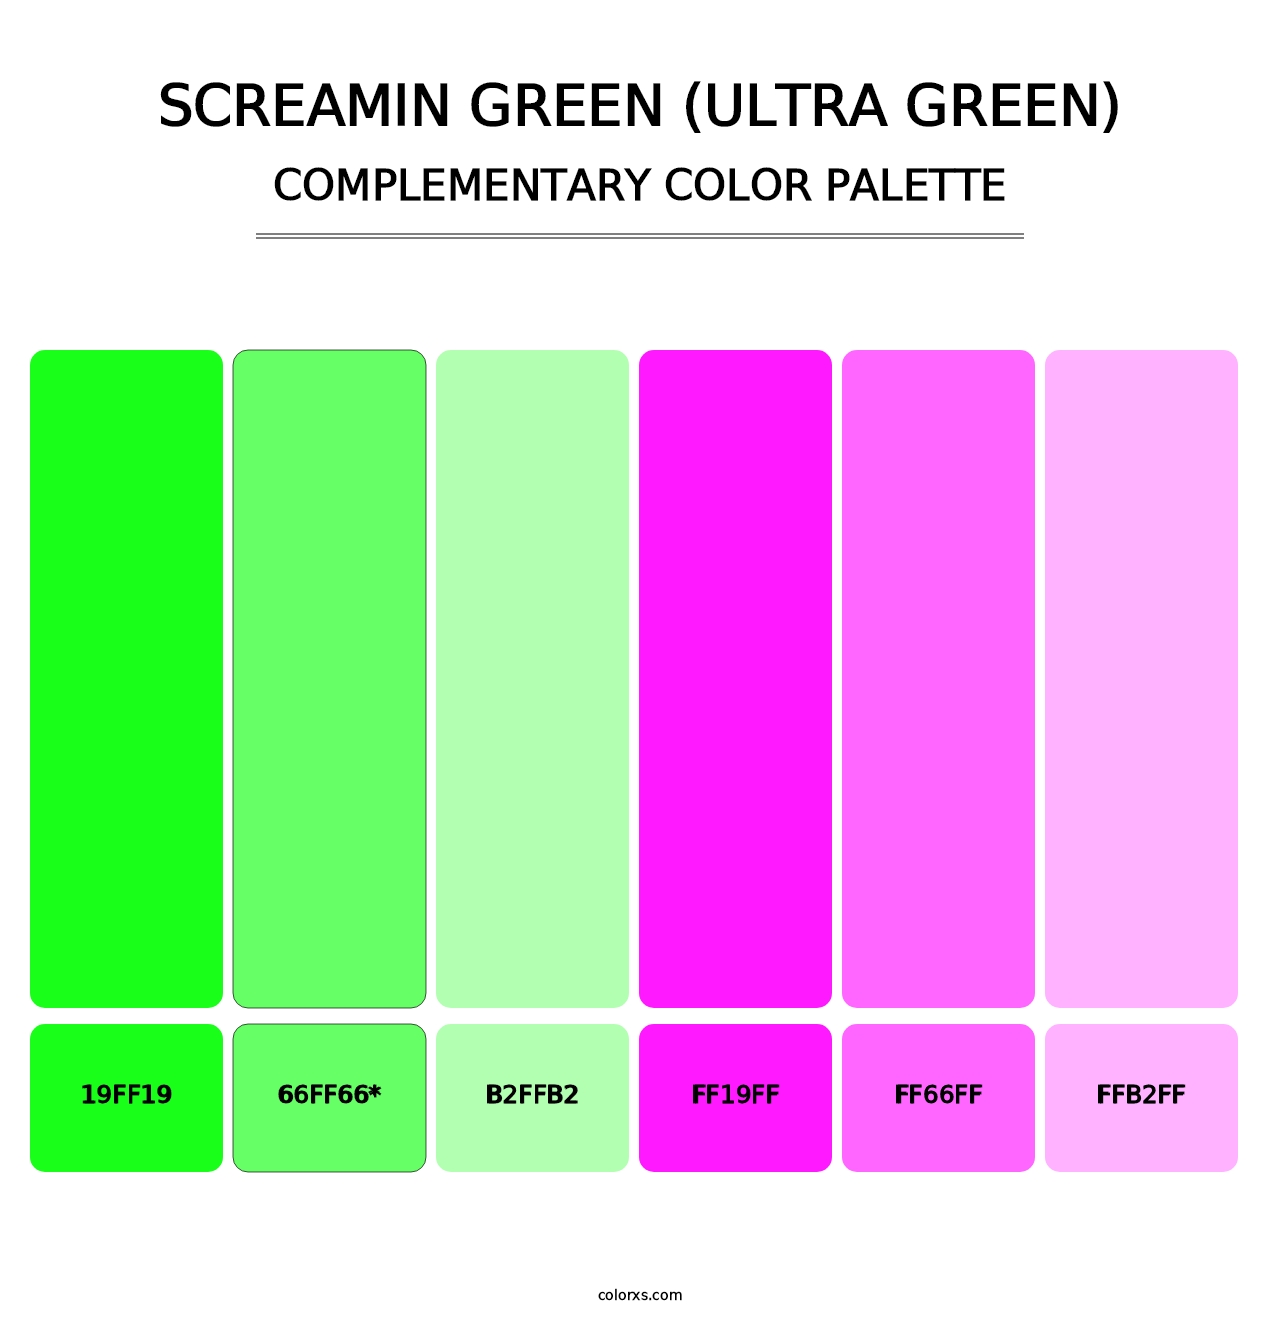 Screamin Green (Ultra Green) - Complementary Color Palette